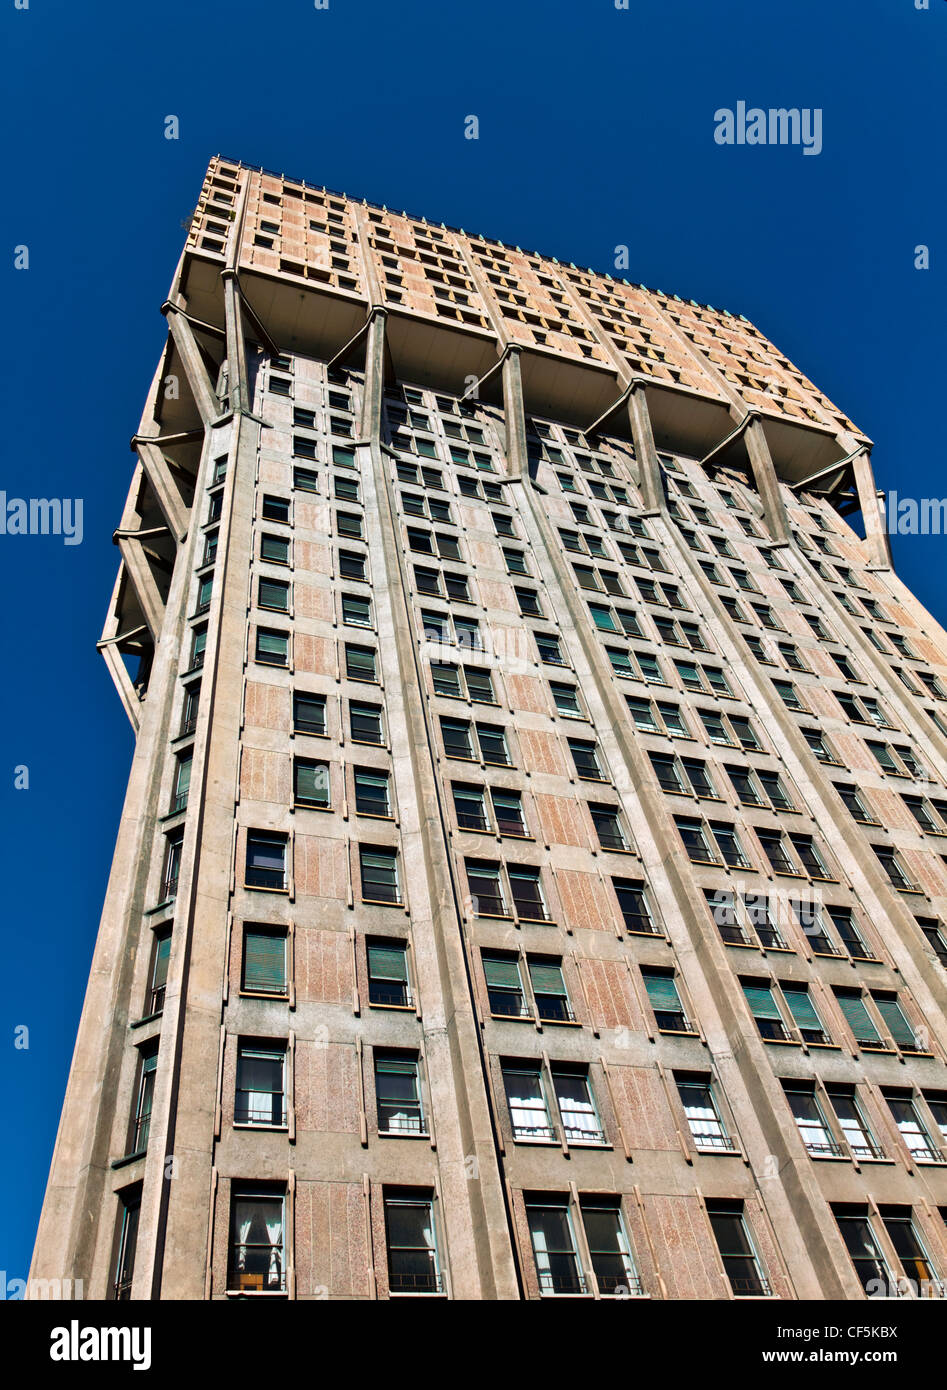 The Velasca Tower, Torre Velasca, designied by BBPR architectural partnership in 1950s, Milan, Lombardy, Italy Stock Photo